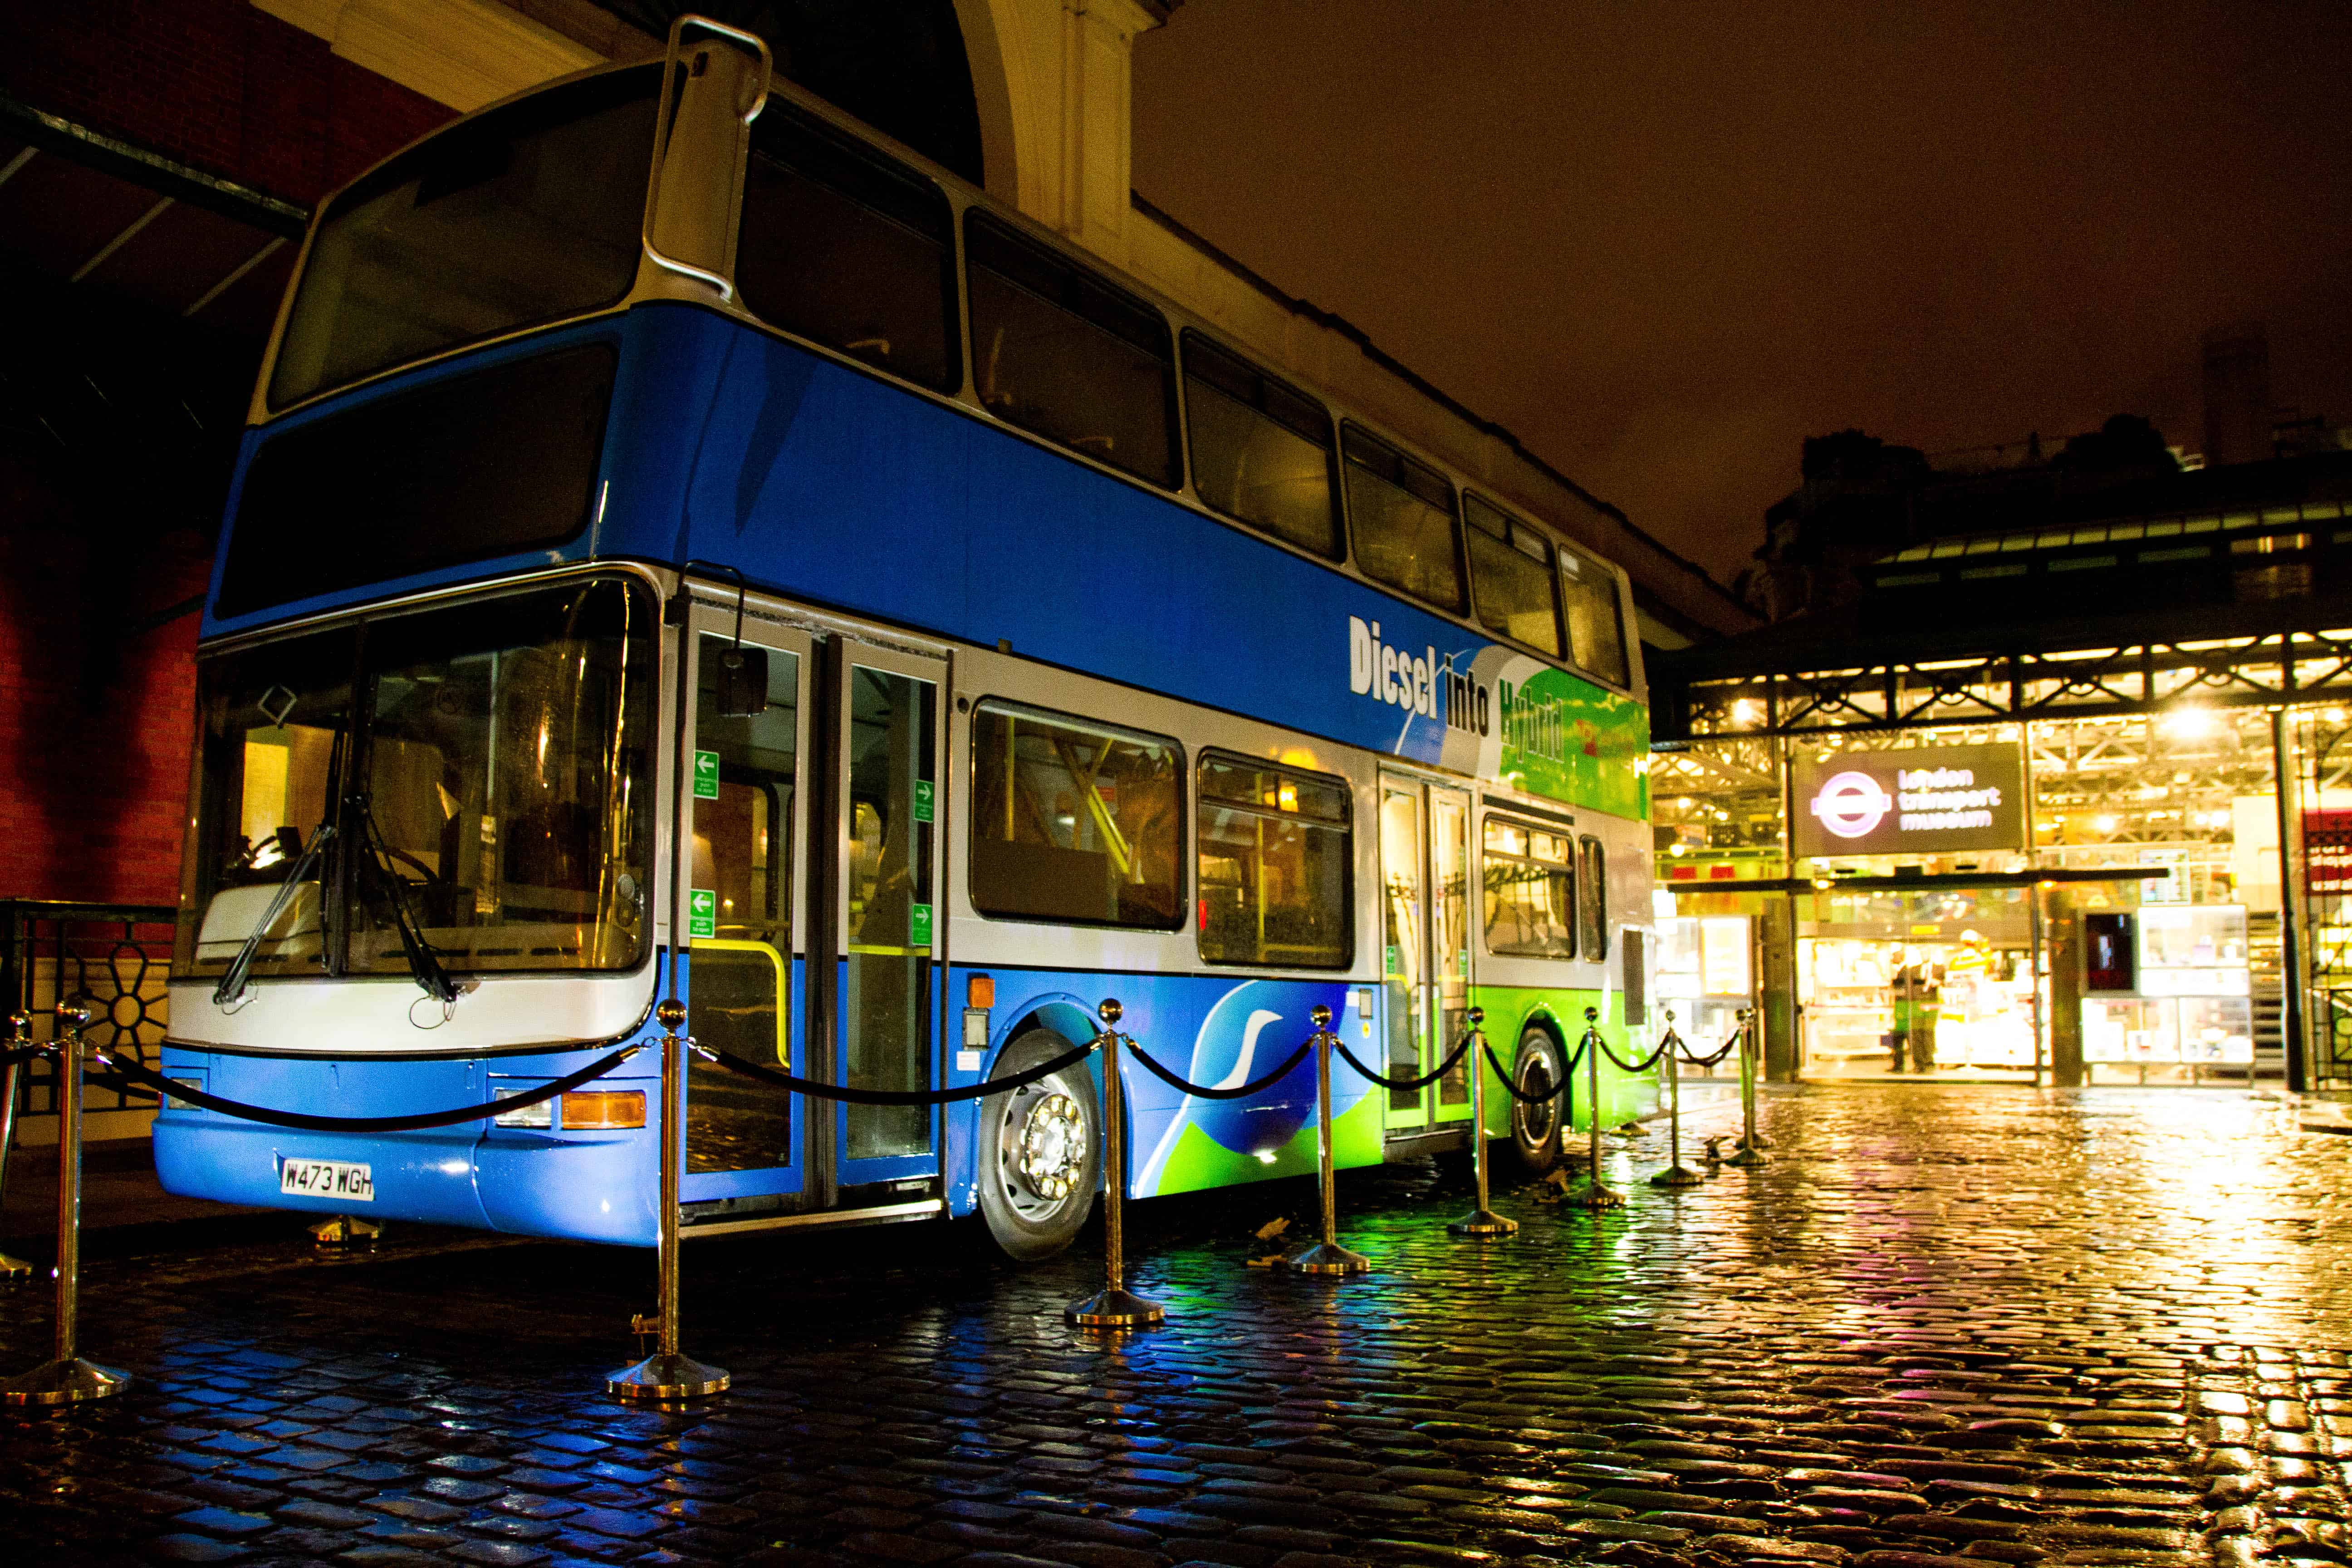 Vantagew is currently in talks with numerous bus operators in the UK